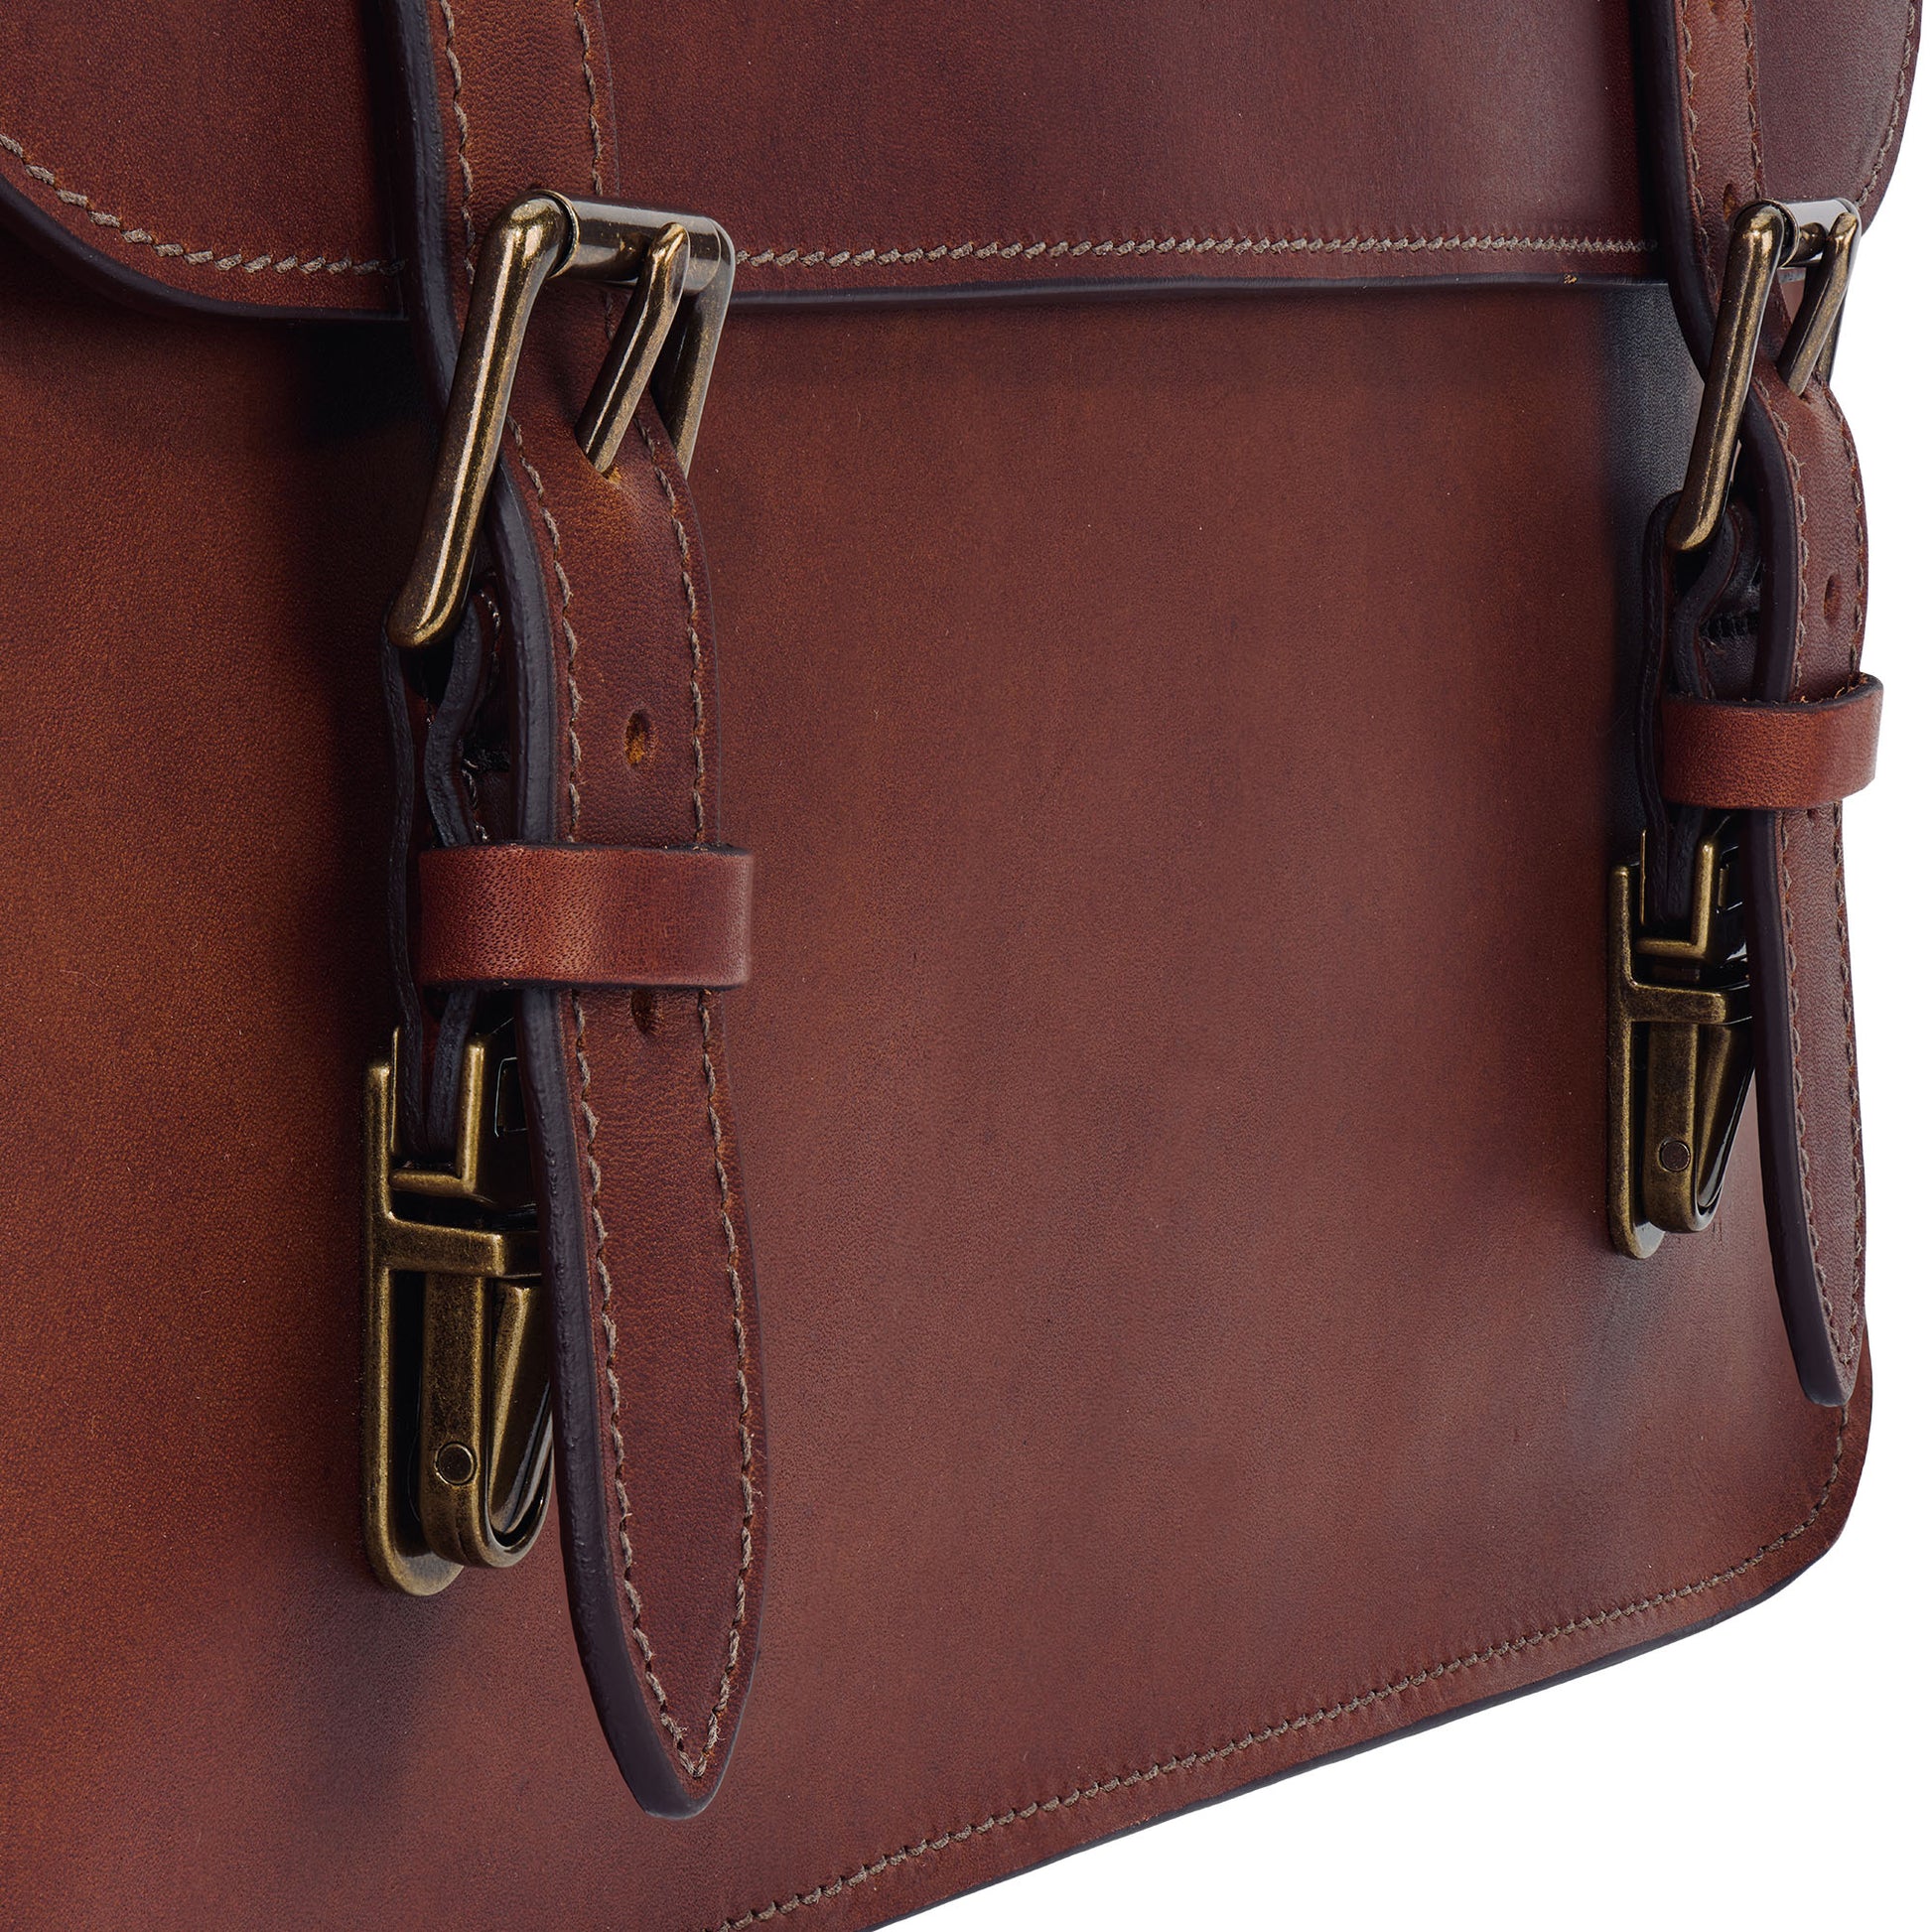 hidden tuck locks on esq. briefcase by Jackson Wayne for easy open/close pictured in vintage brown leather color